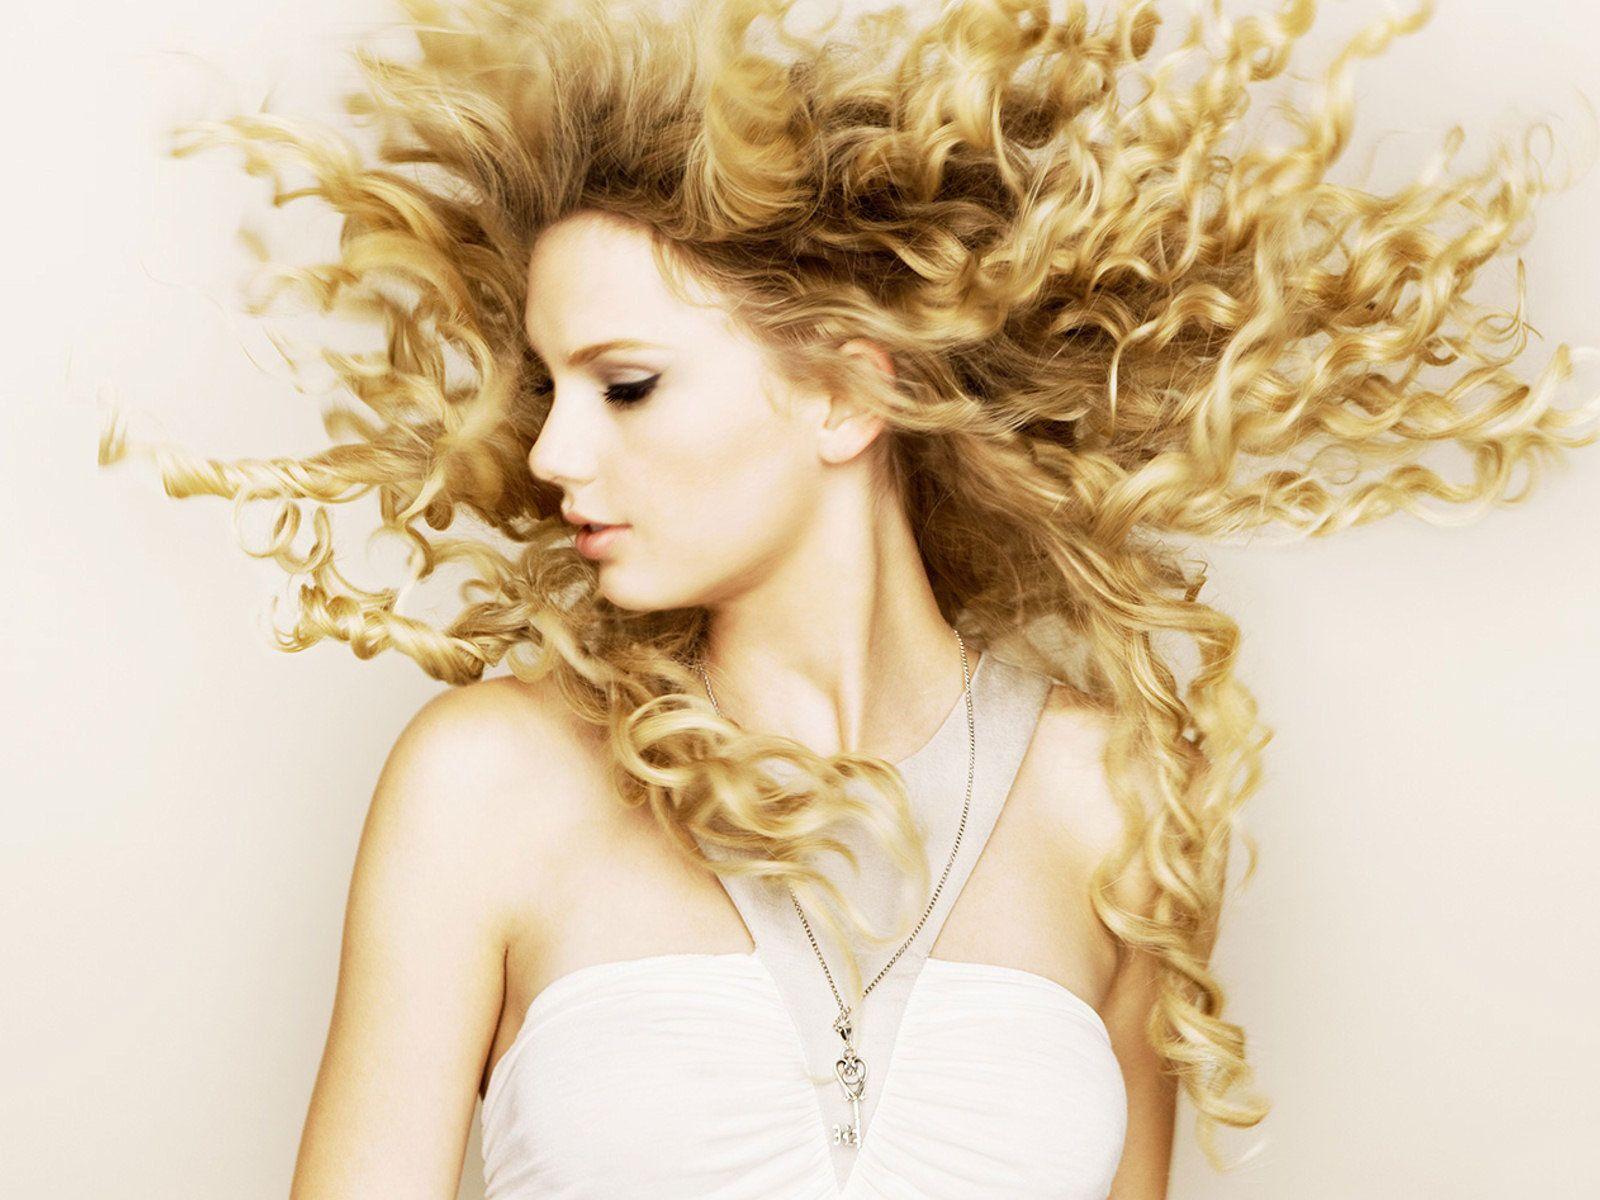 Taylor Swift Albums HD Wallpaper, Background Image